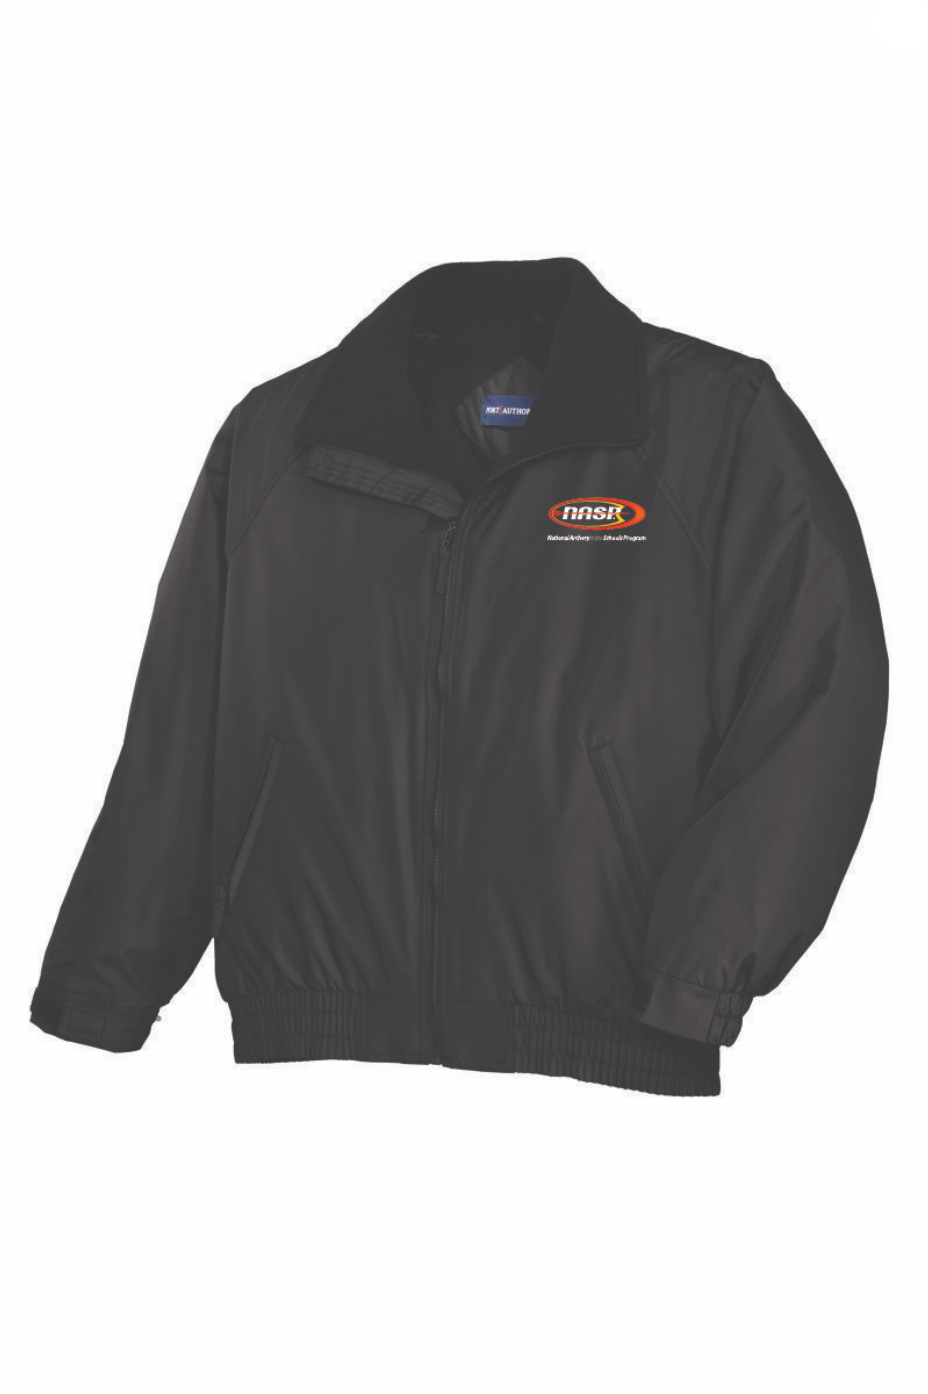 NASP® Embroidered Jacket